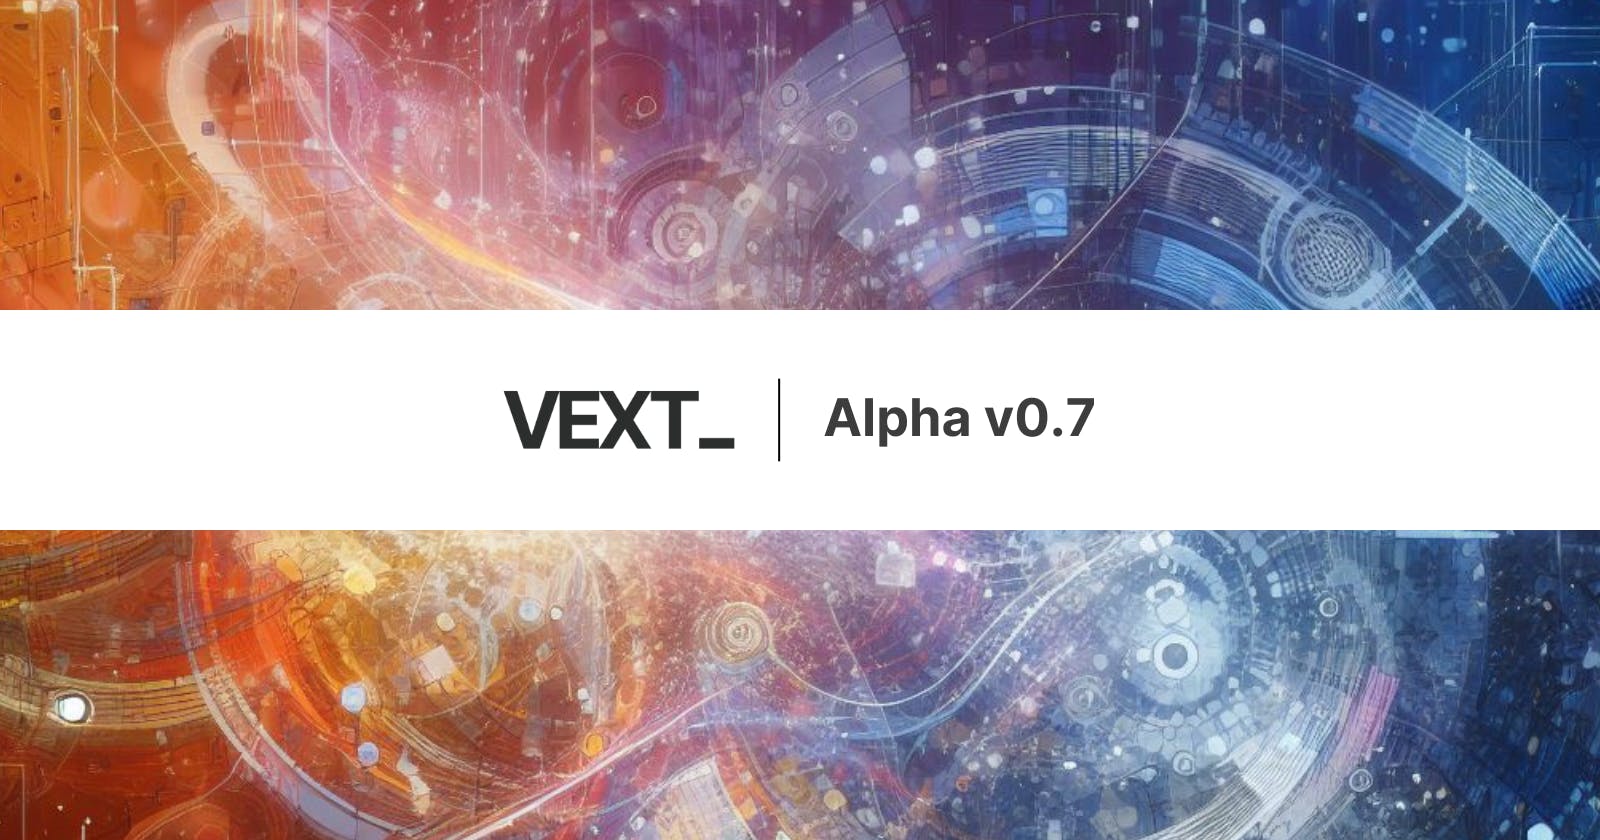 Vext Alpha v0.7: What's New